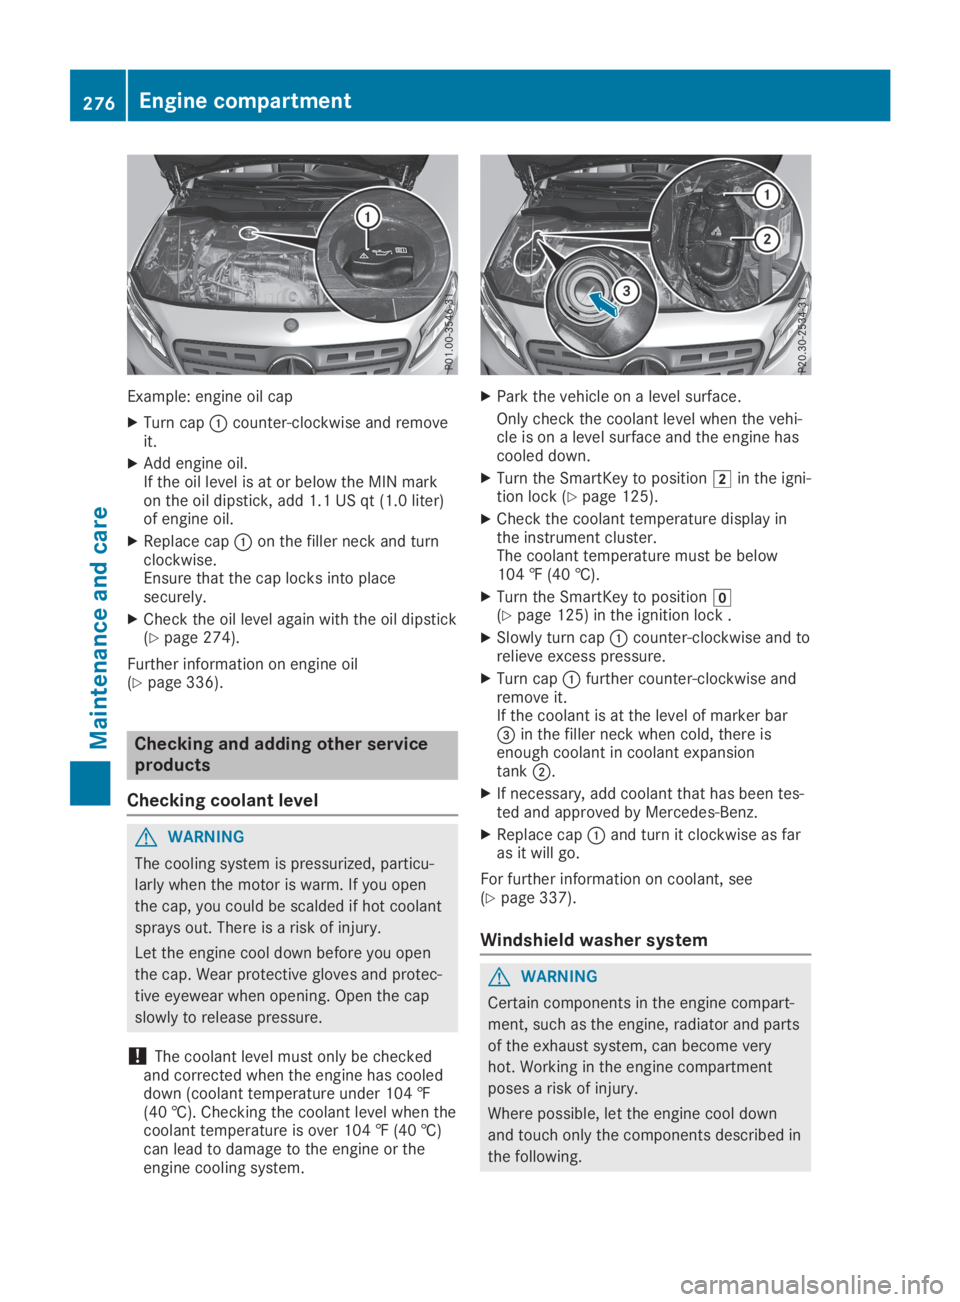 MERCEDES-BENZ GLA 2019  Owners Manual Example: engine oil cap
XTurn cap�Ccounter-clockwise and removeit.
XAdd engine oil.If the oil level is at or below the MIN markon the oil dipstick, add 1.1 US qt (1.0 liter)of engine oil.
XReplace cap